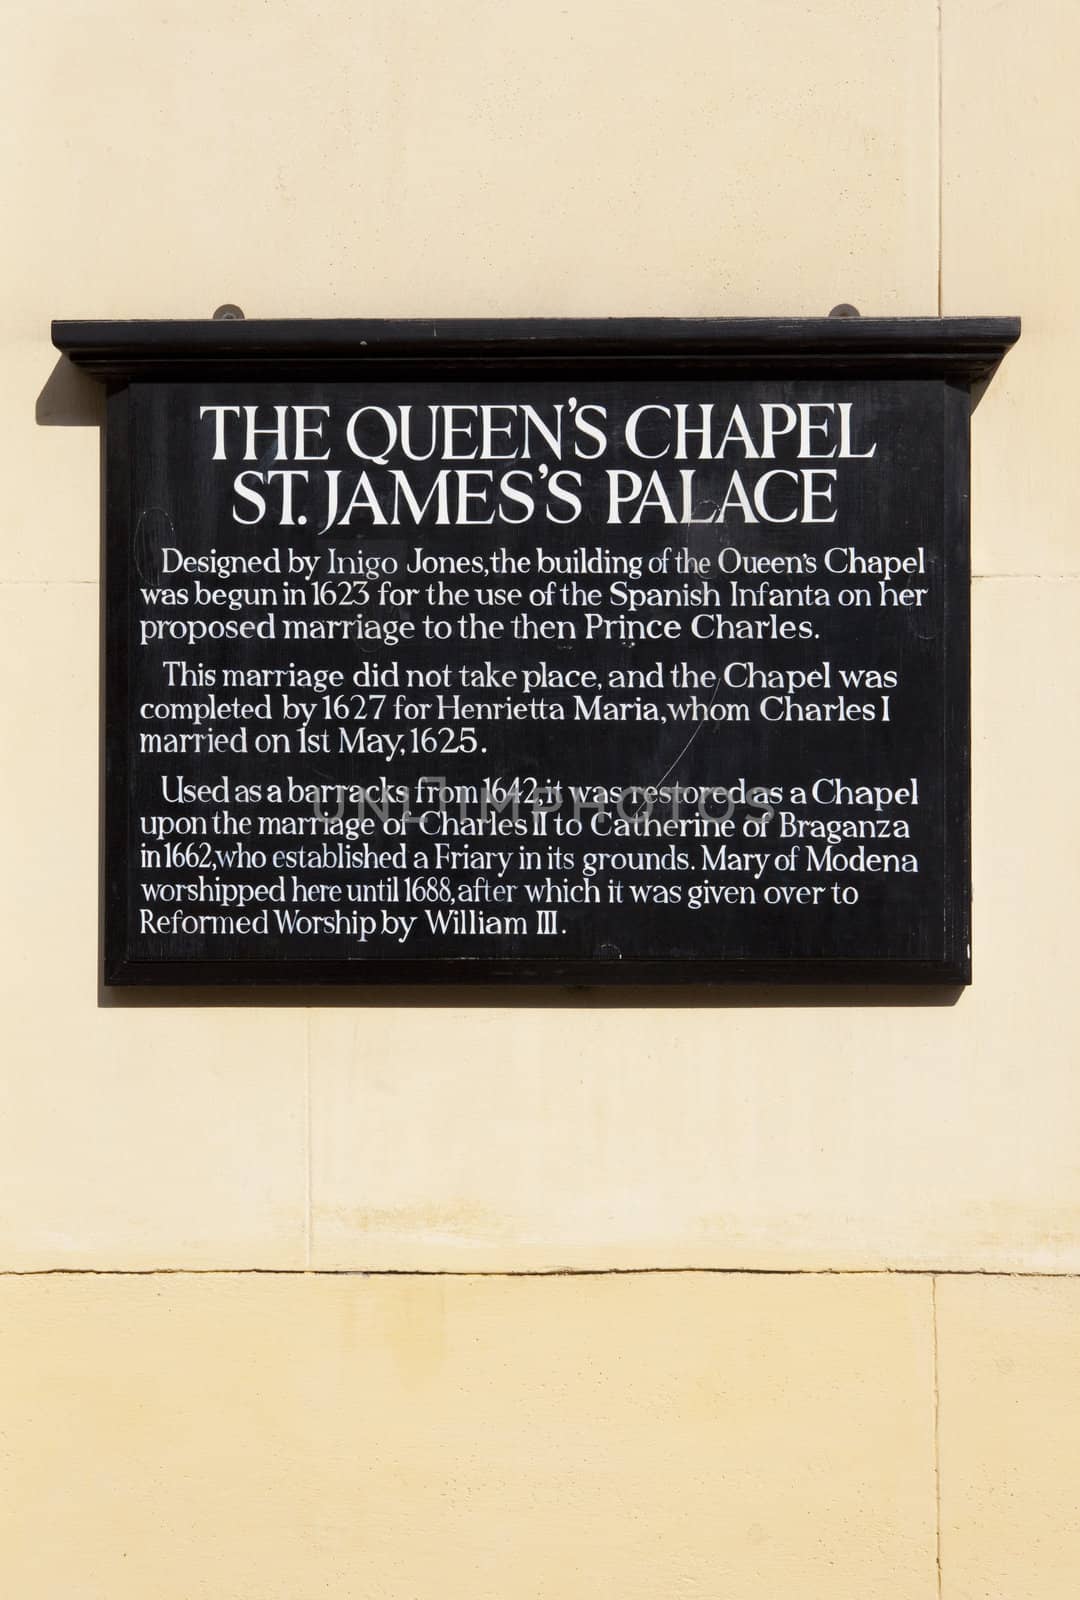 Queen's Chapel at St. James's Palace in London.